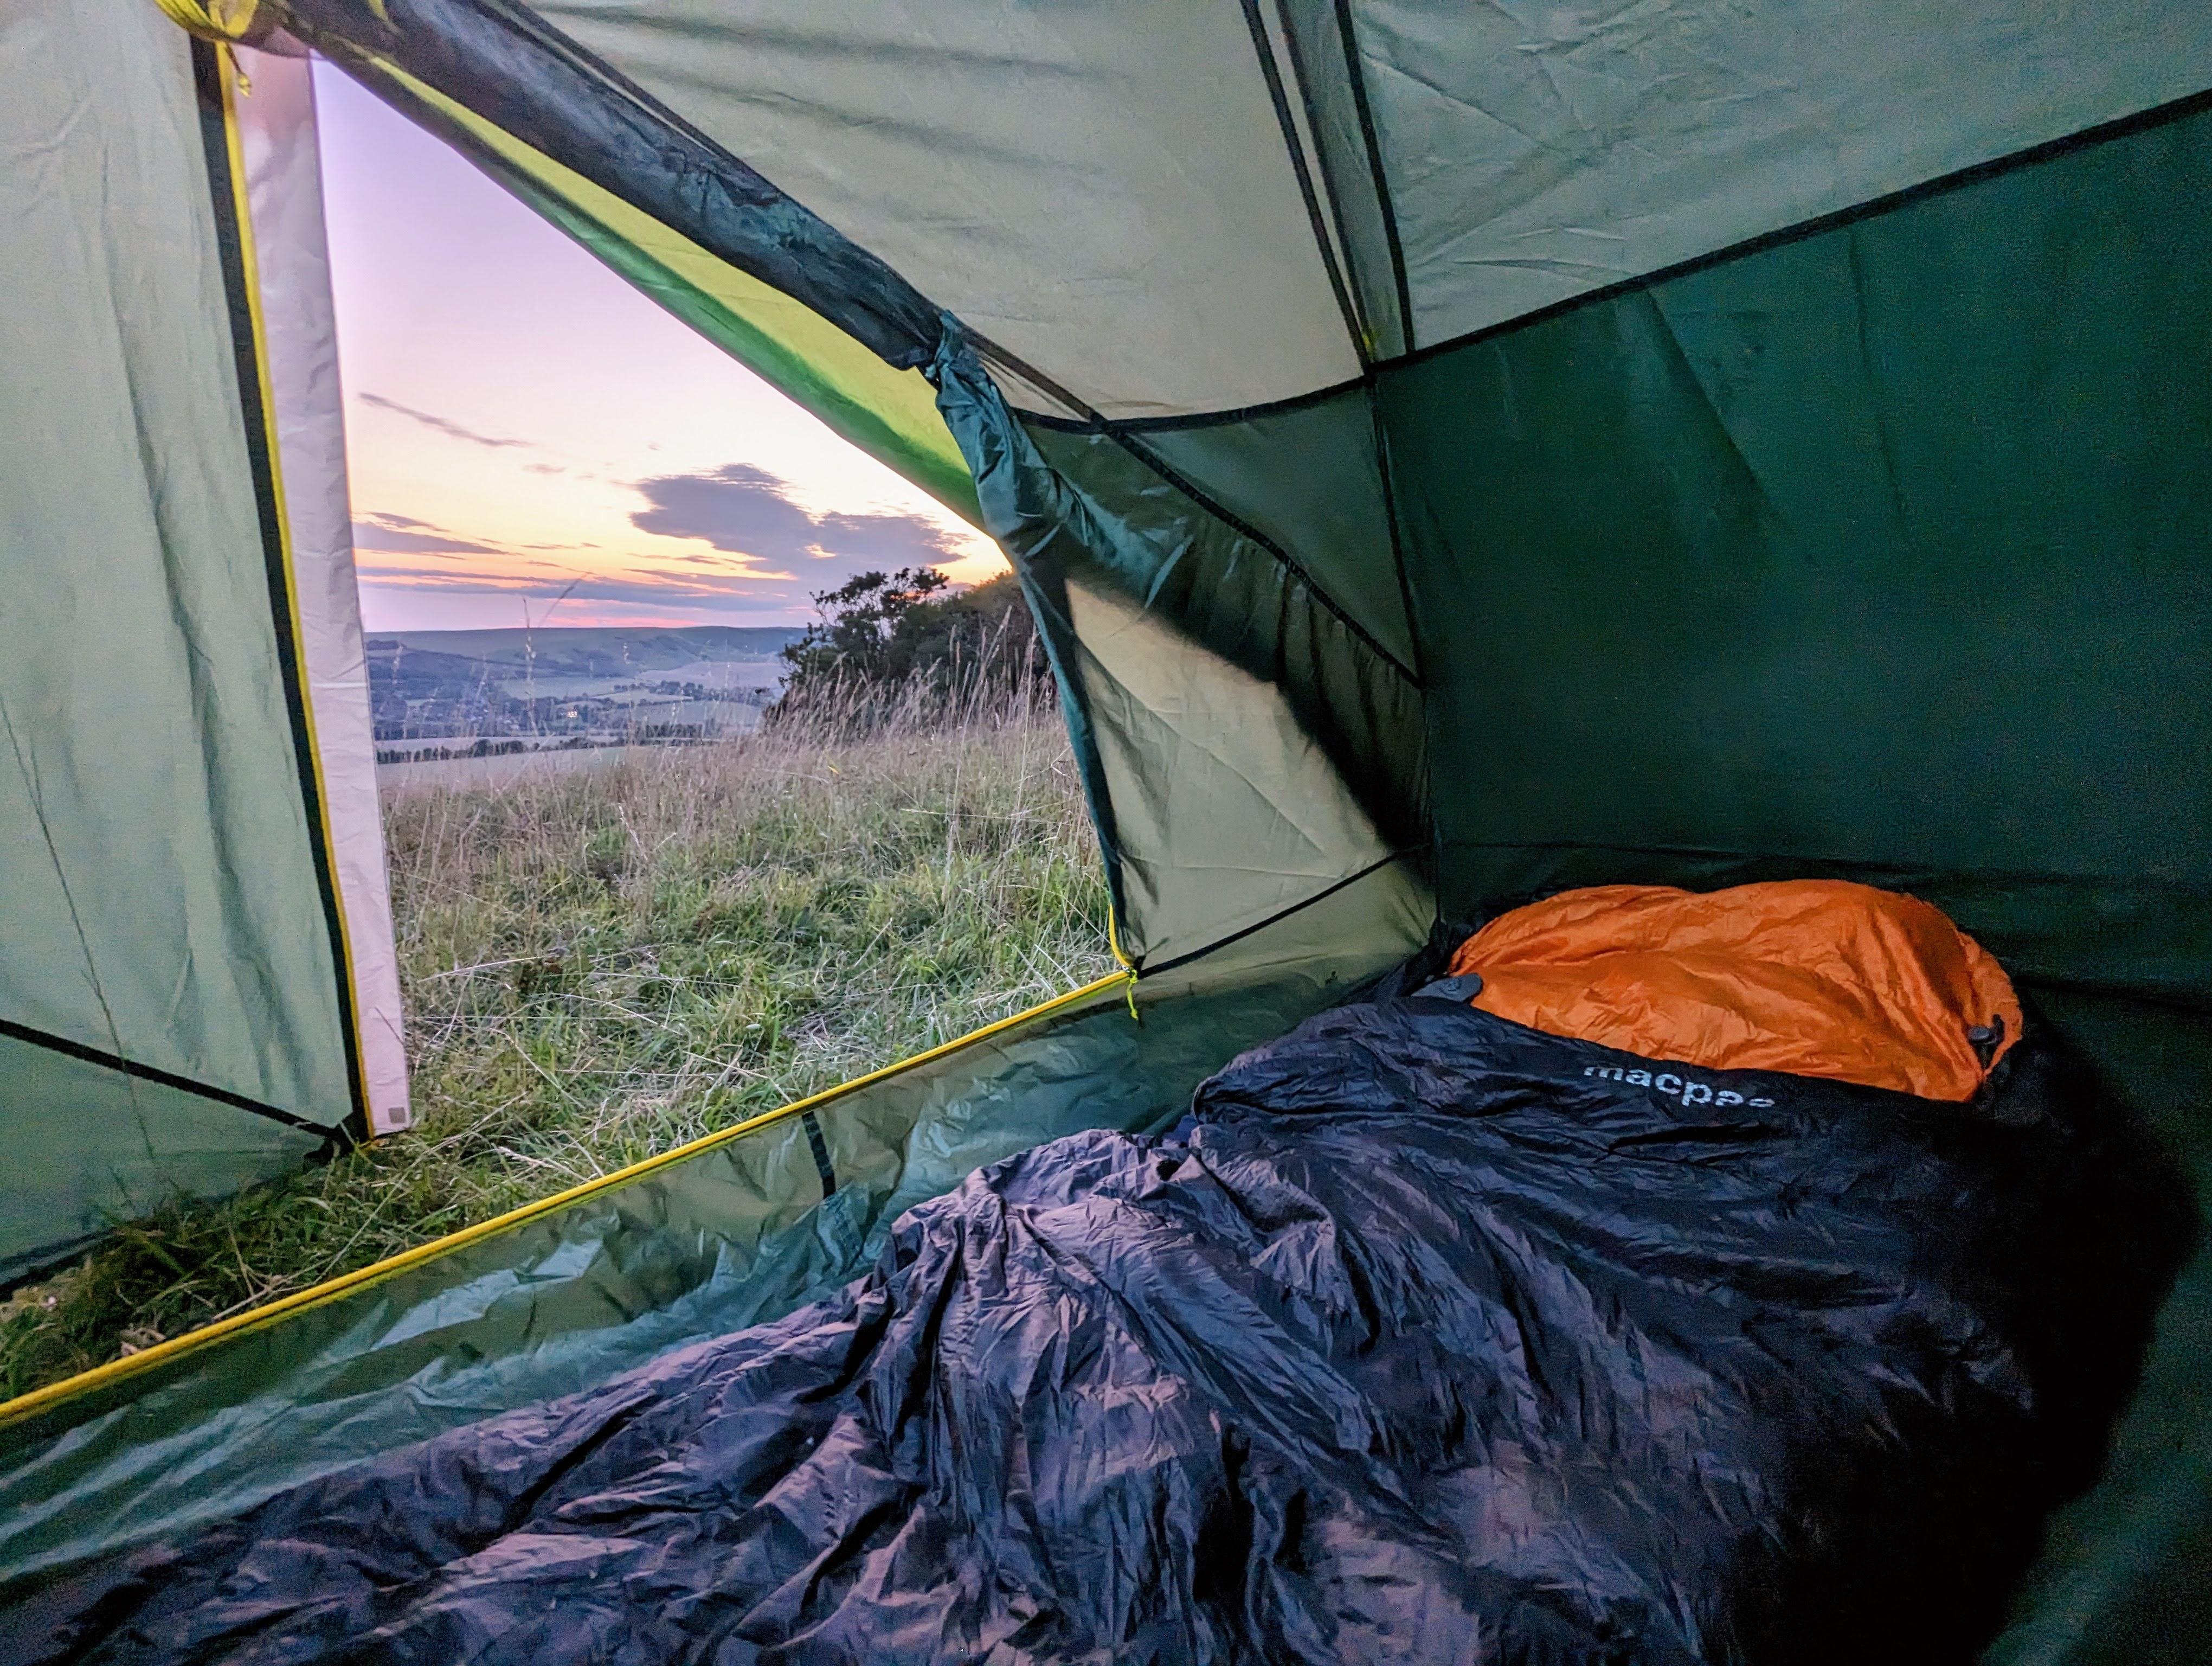 Sleeping bag laid out inside a tent with a view of the sunset